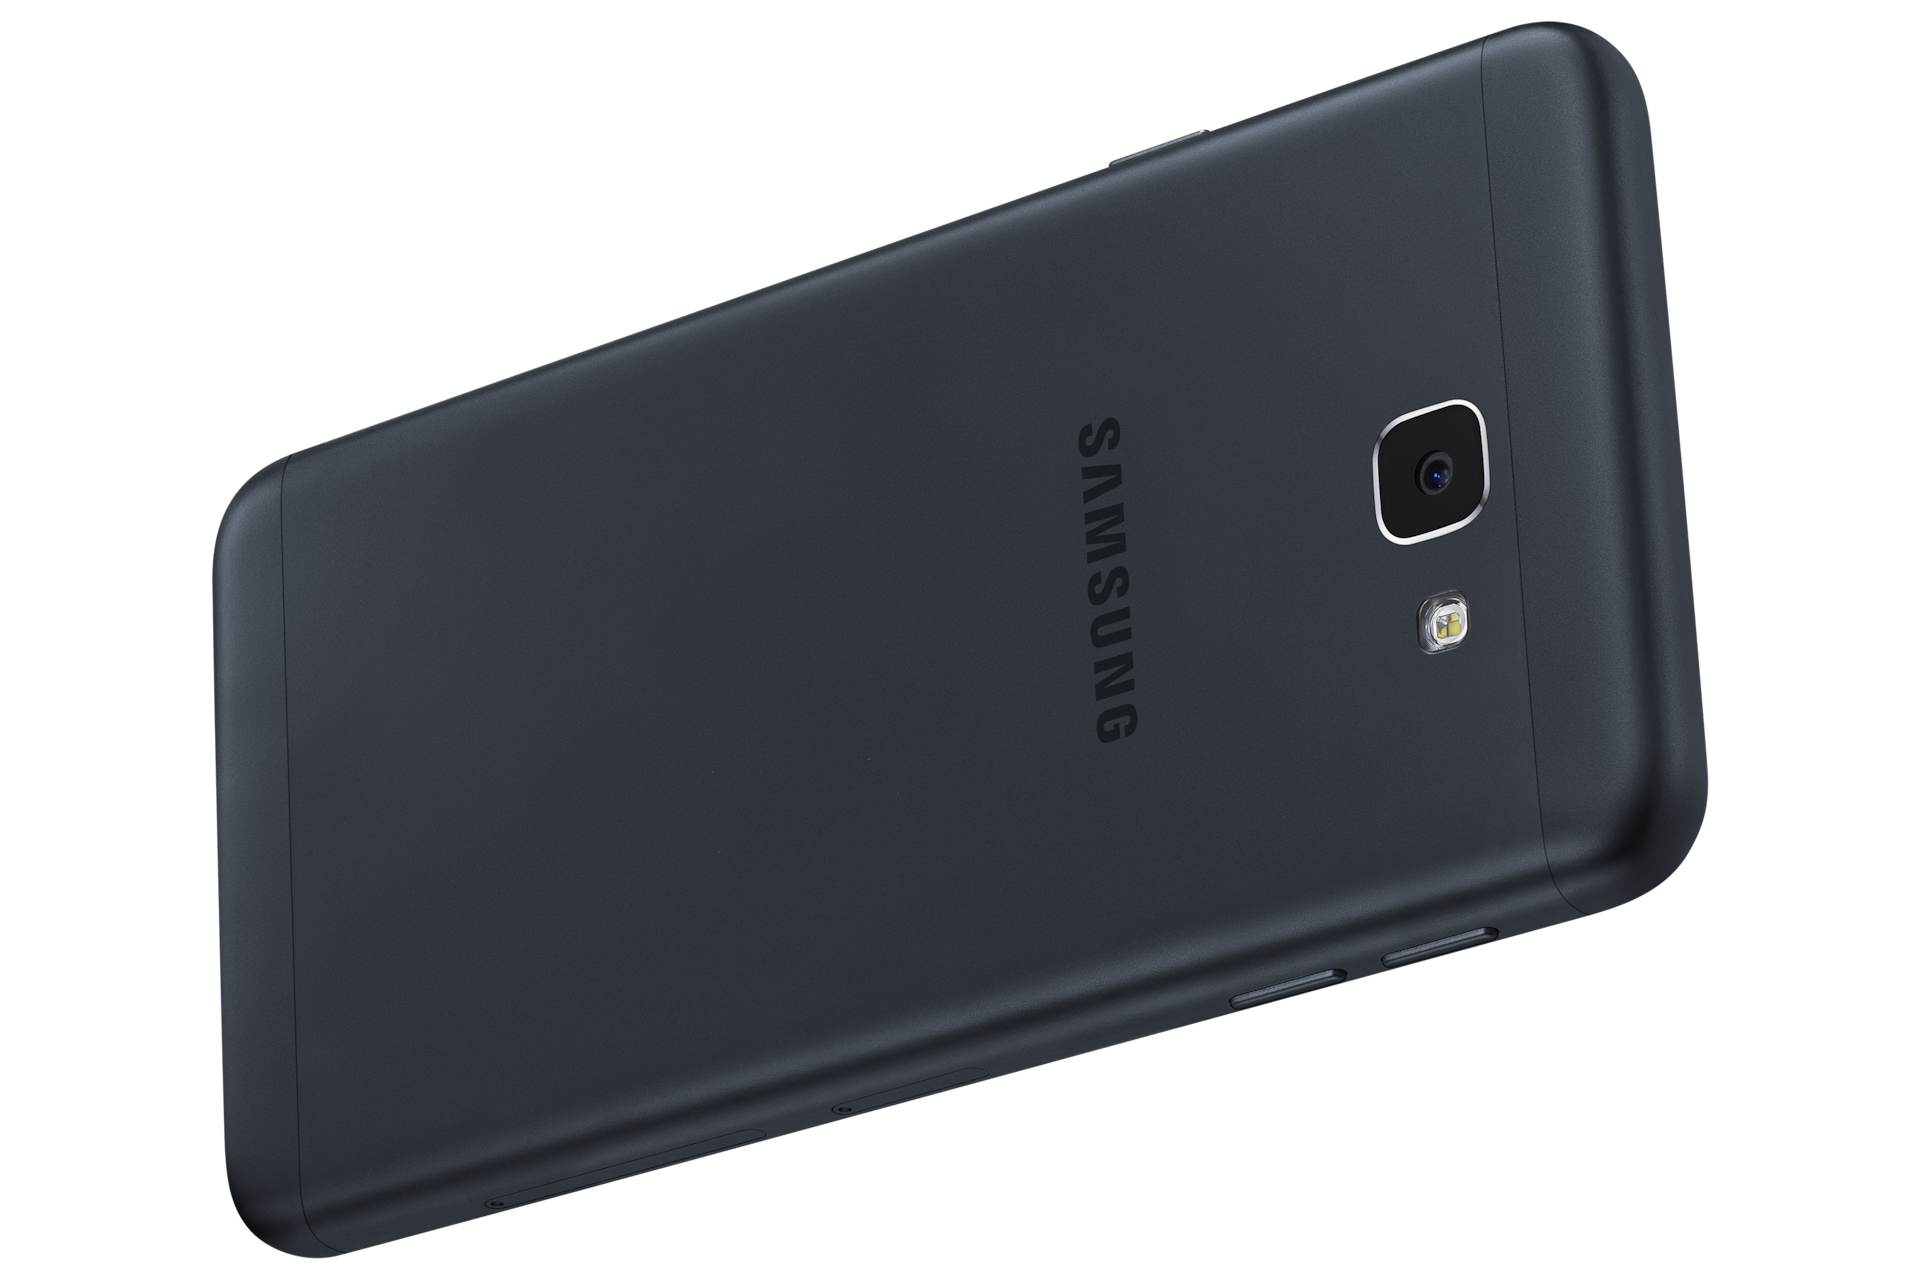 How To Root Samsung Galaxy J5 Prime Smg570m Root Guide